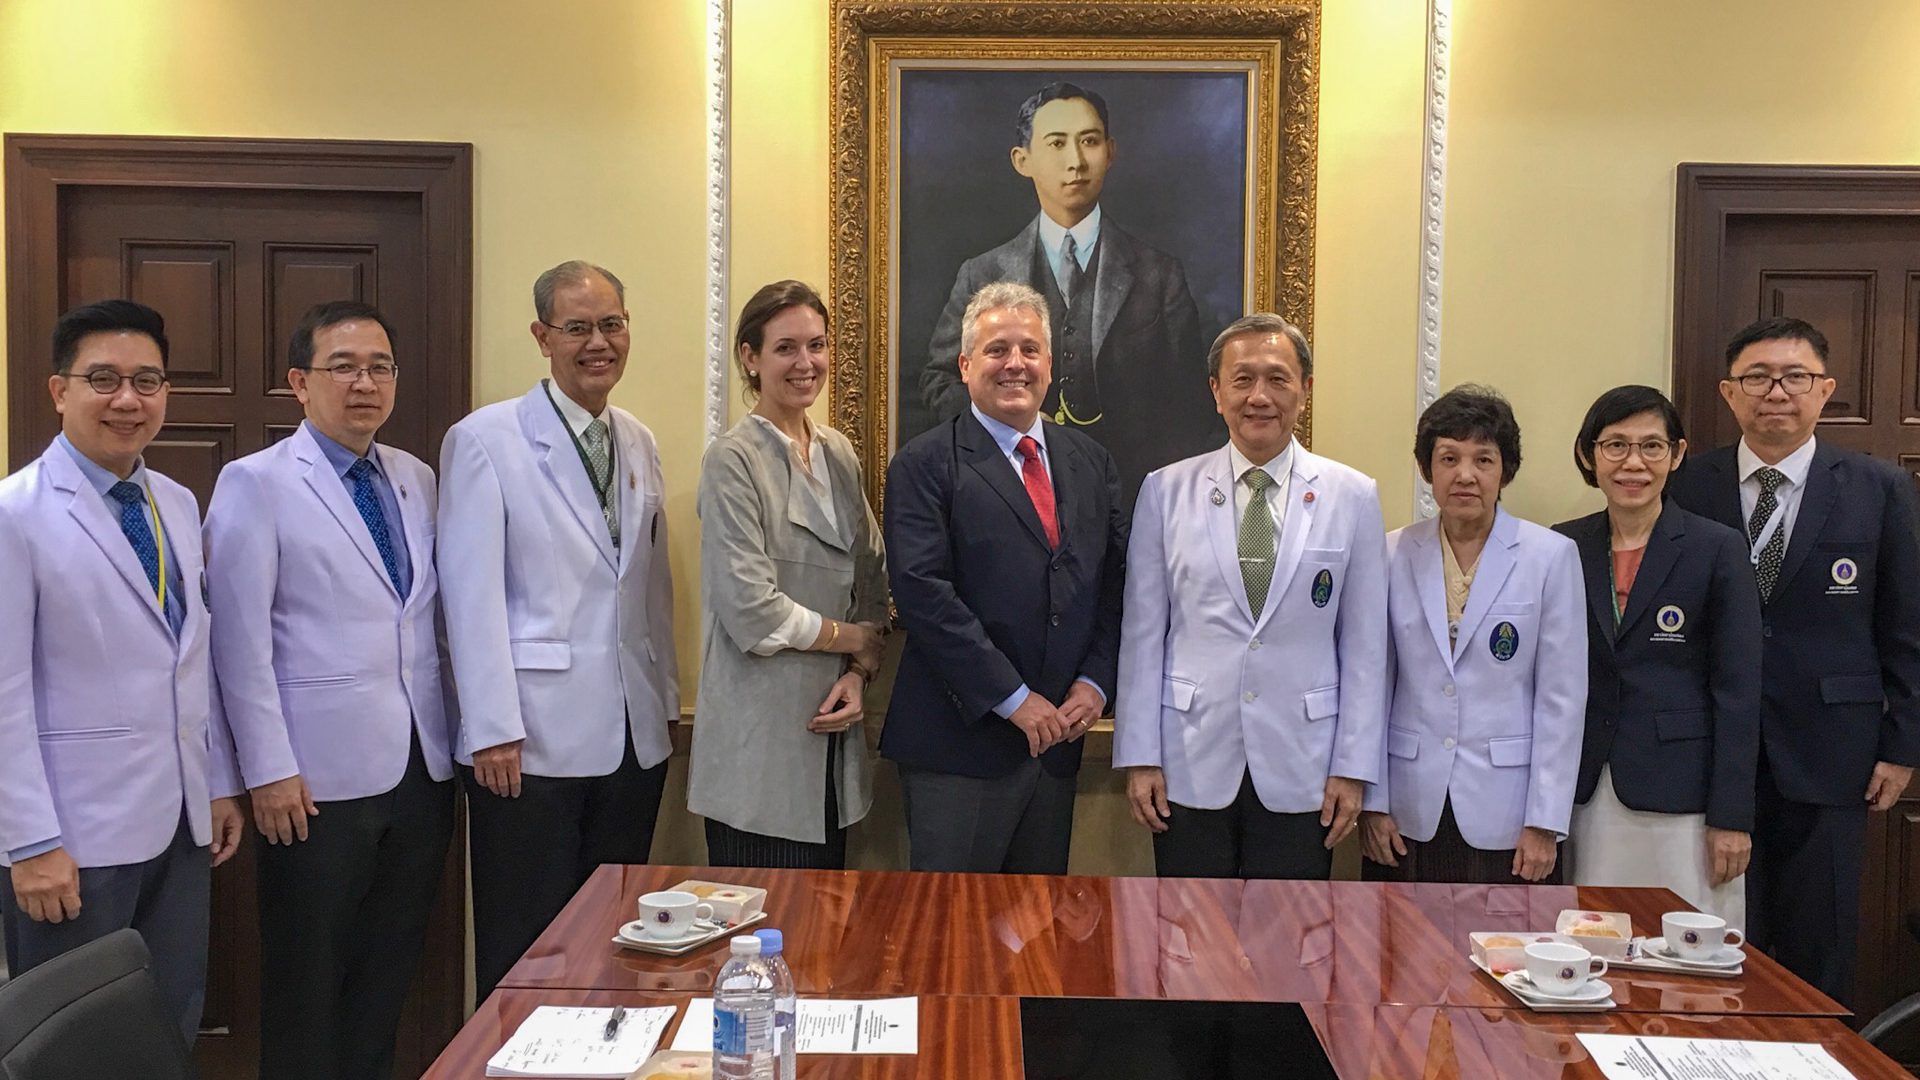 A Discussion on Educational Collaborations Between OHSU and Siriraj